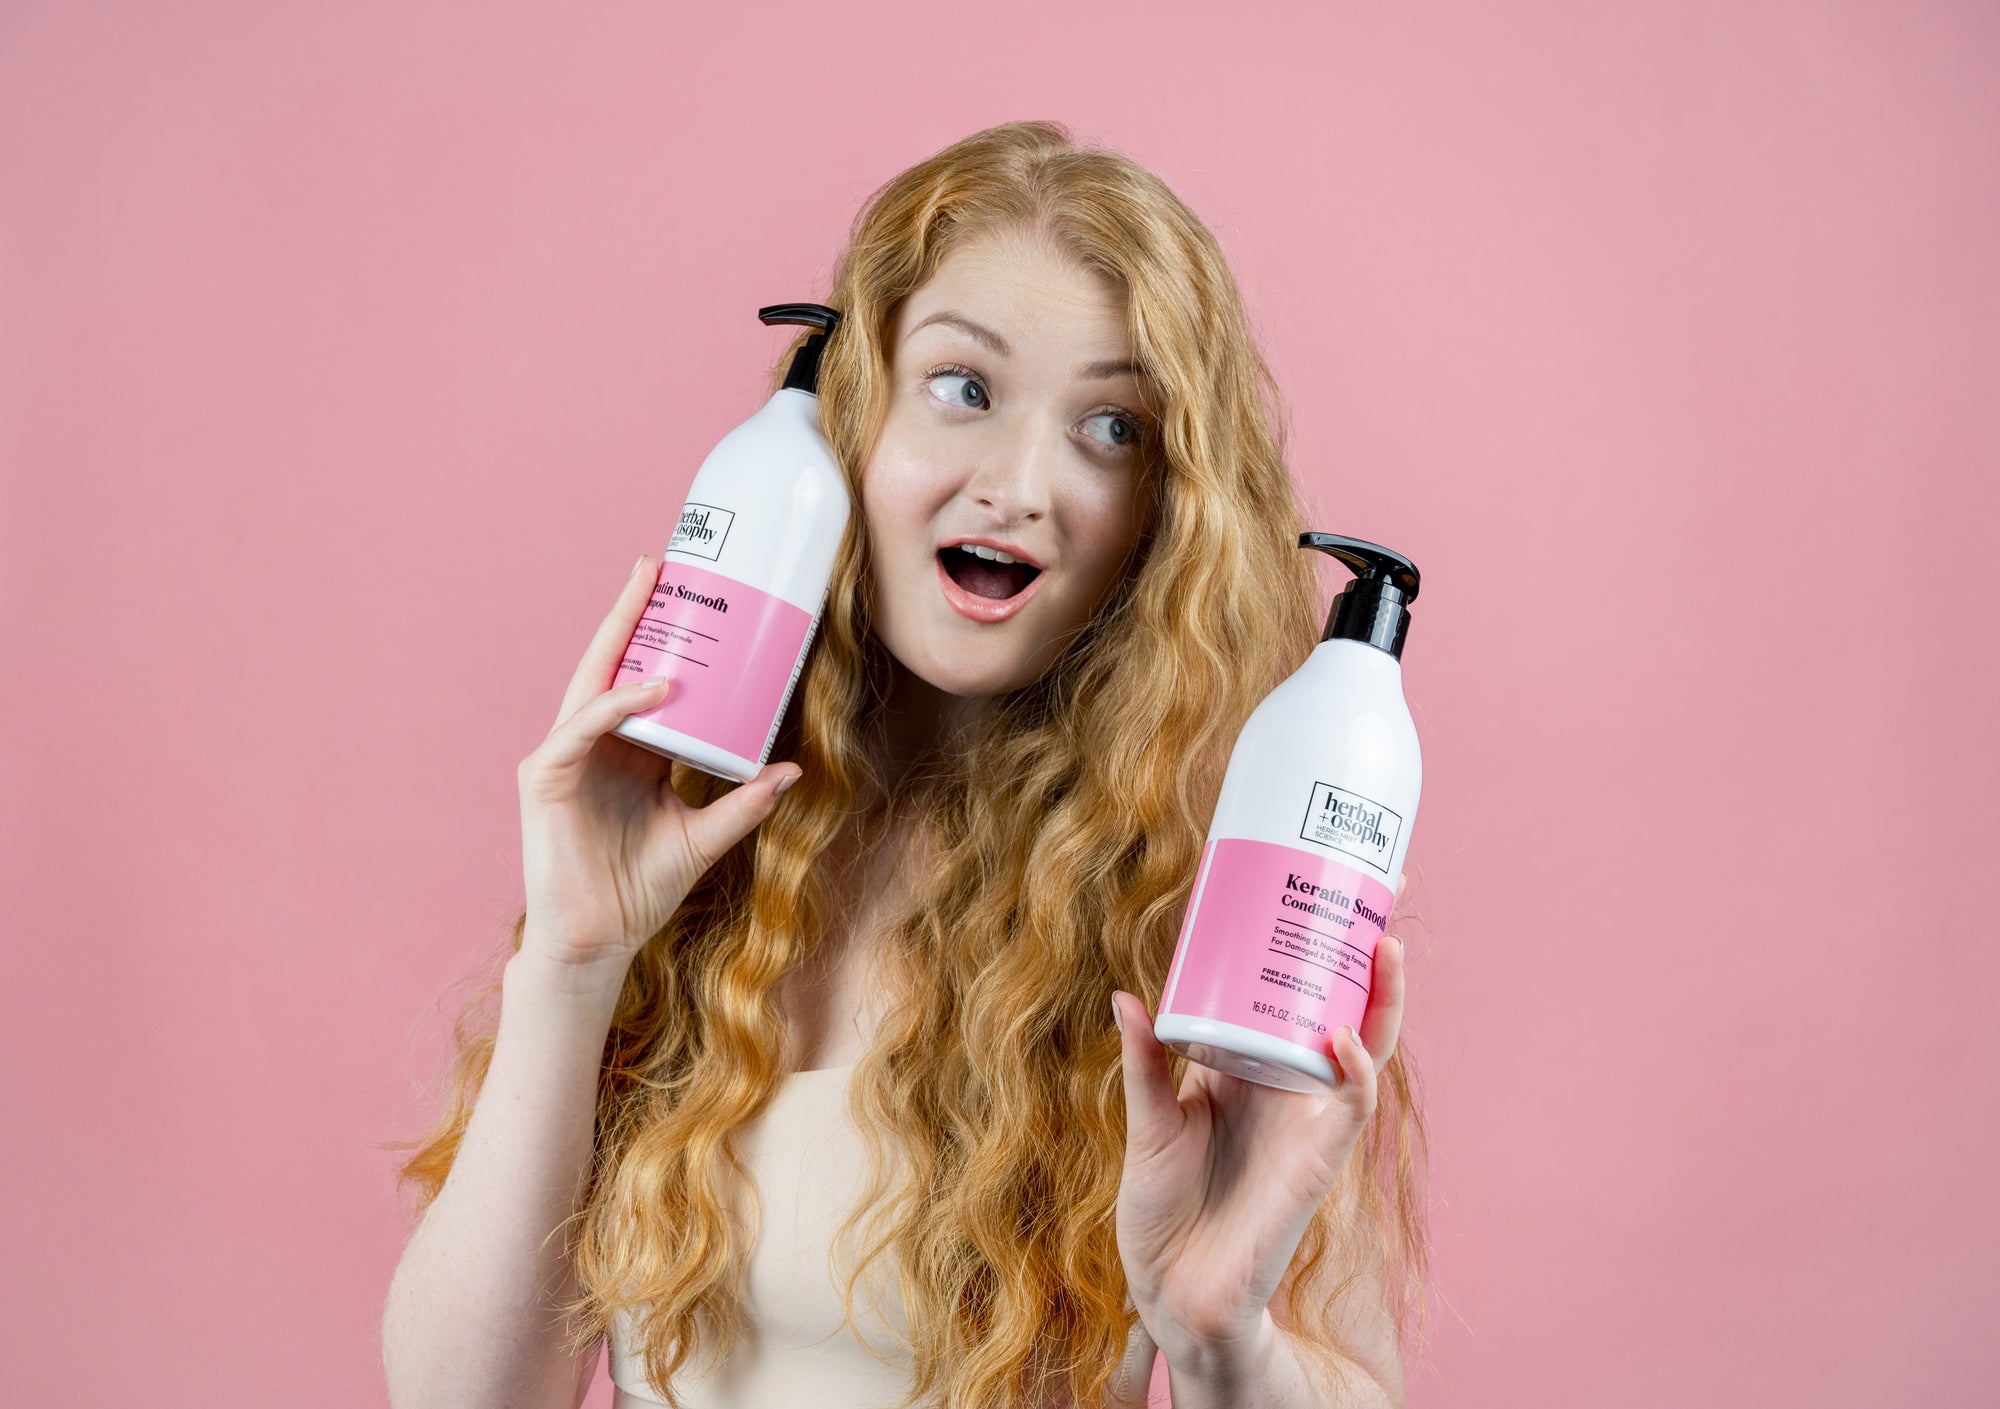 woman with long red hair holding Herbalosophy Keratin Smooth shampoo and conditioner bottles